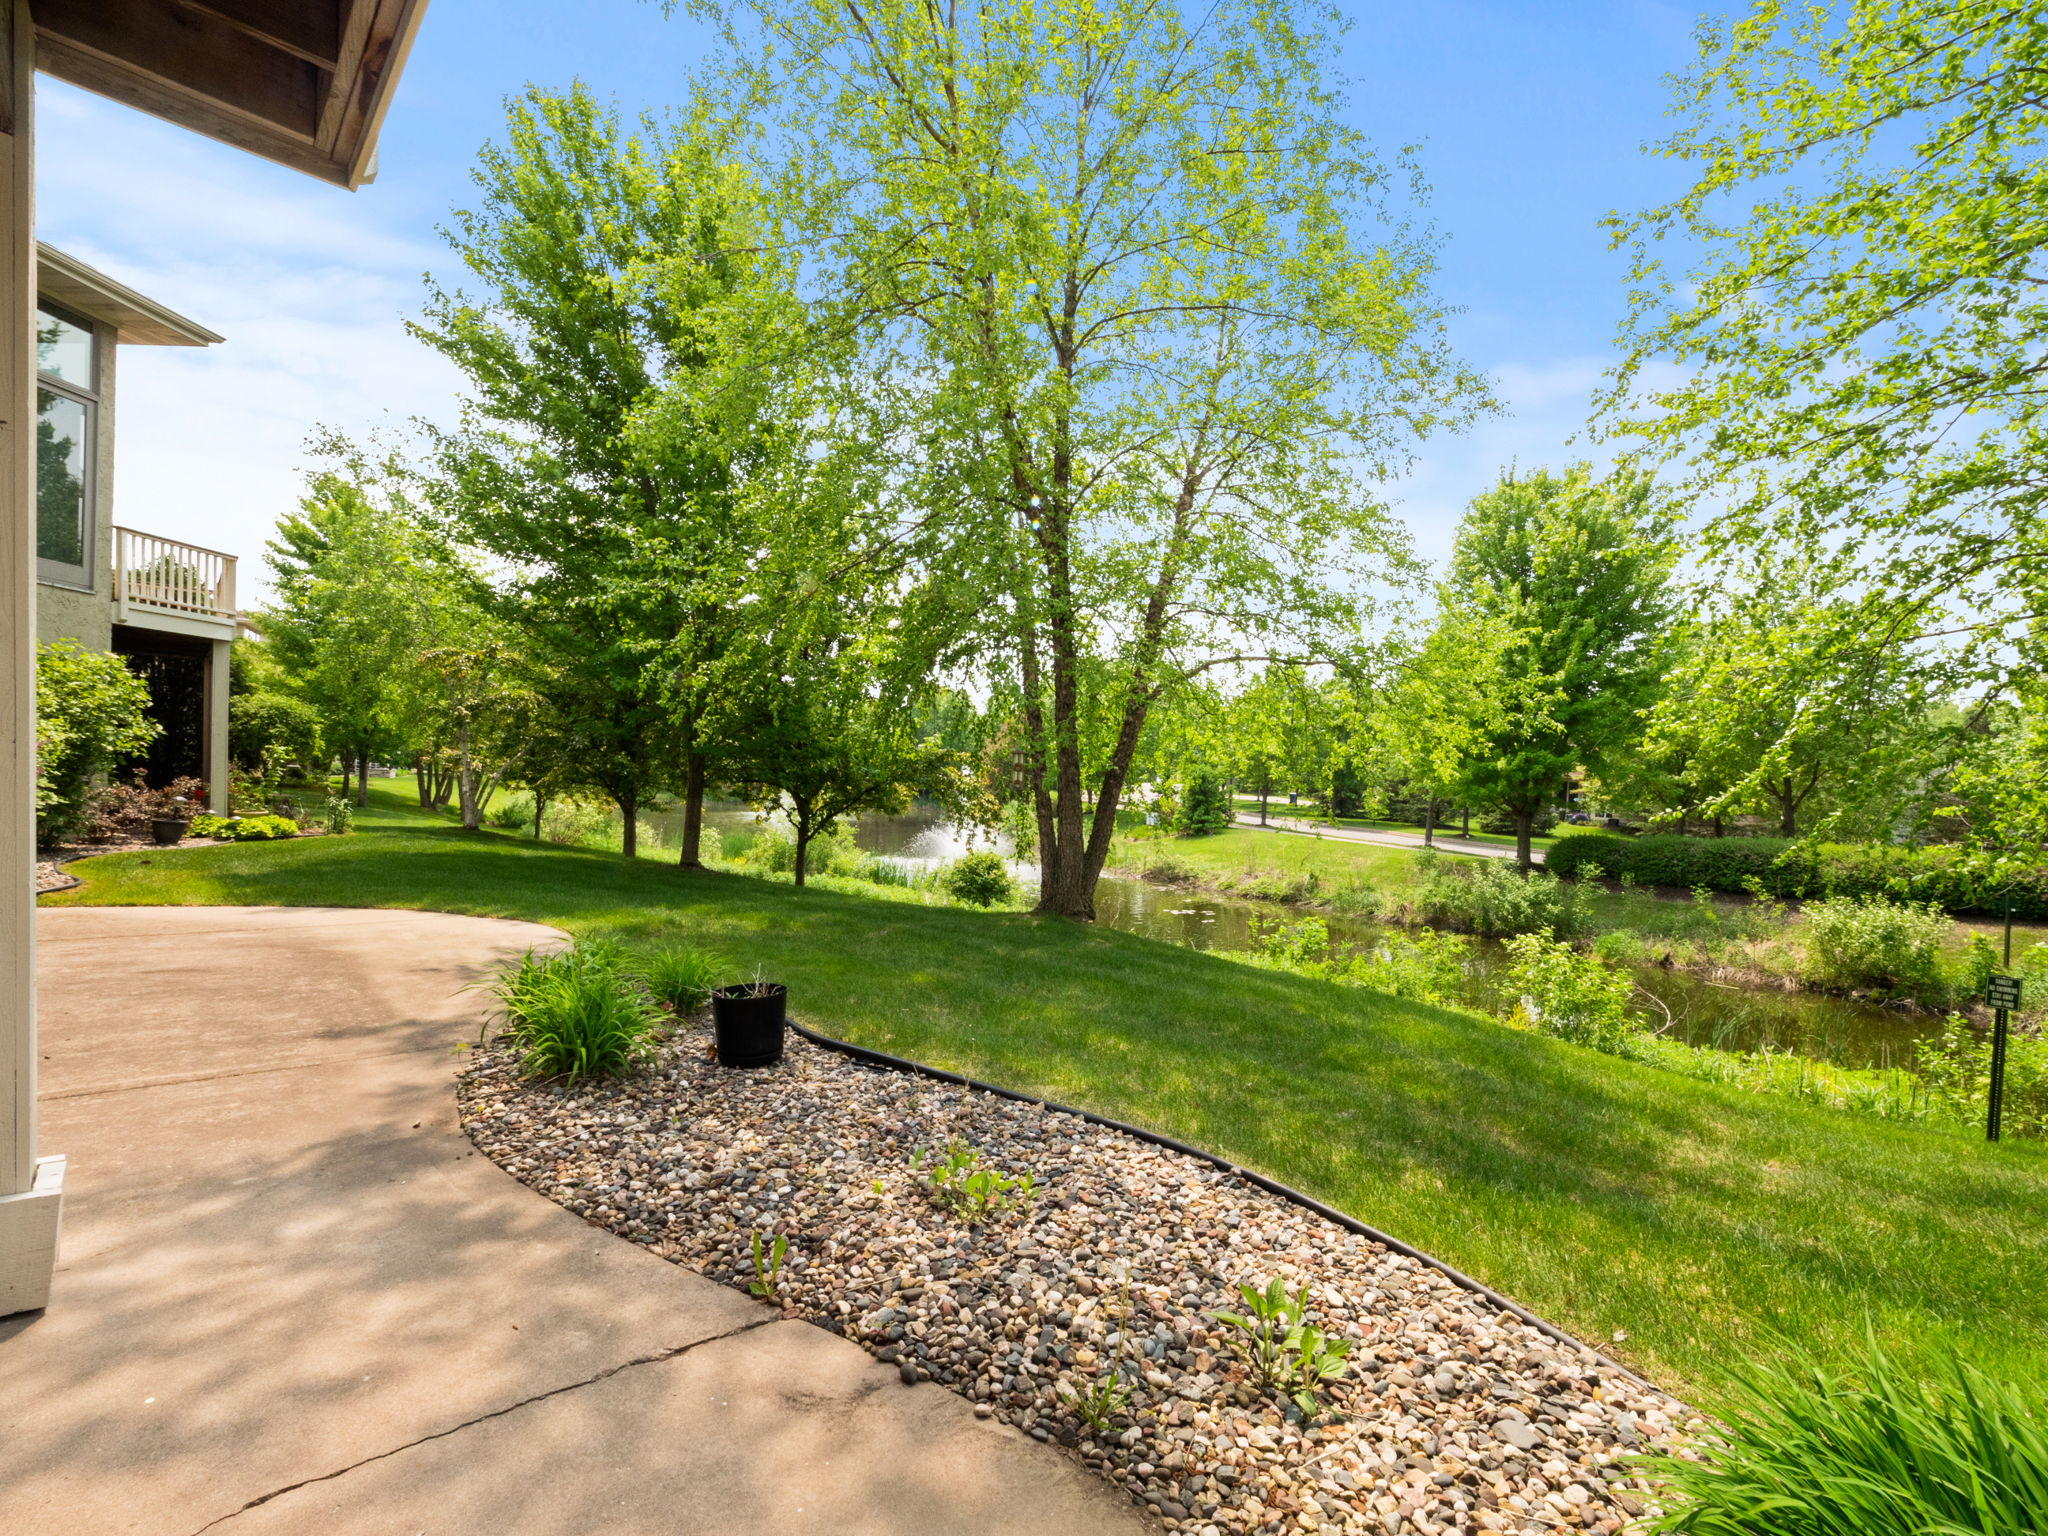  Waterford Drive, Golden Valley, MN 55422, US Photo 42